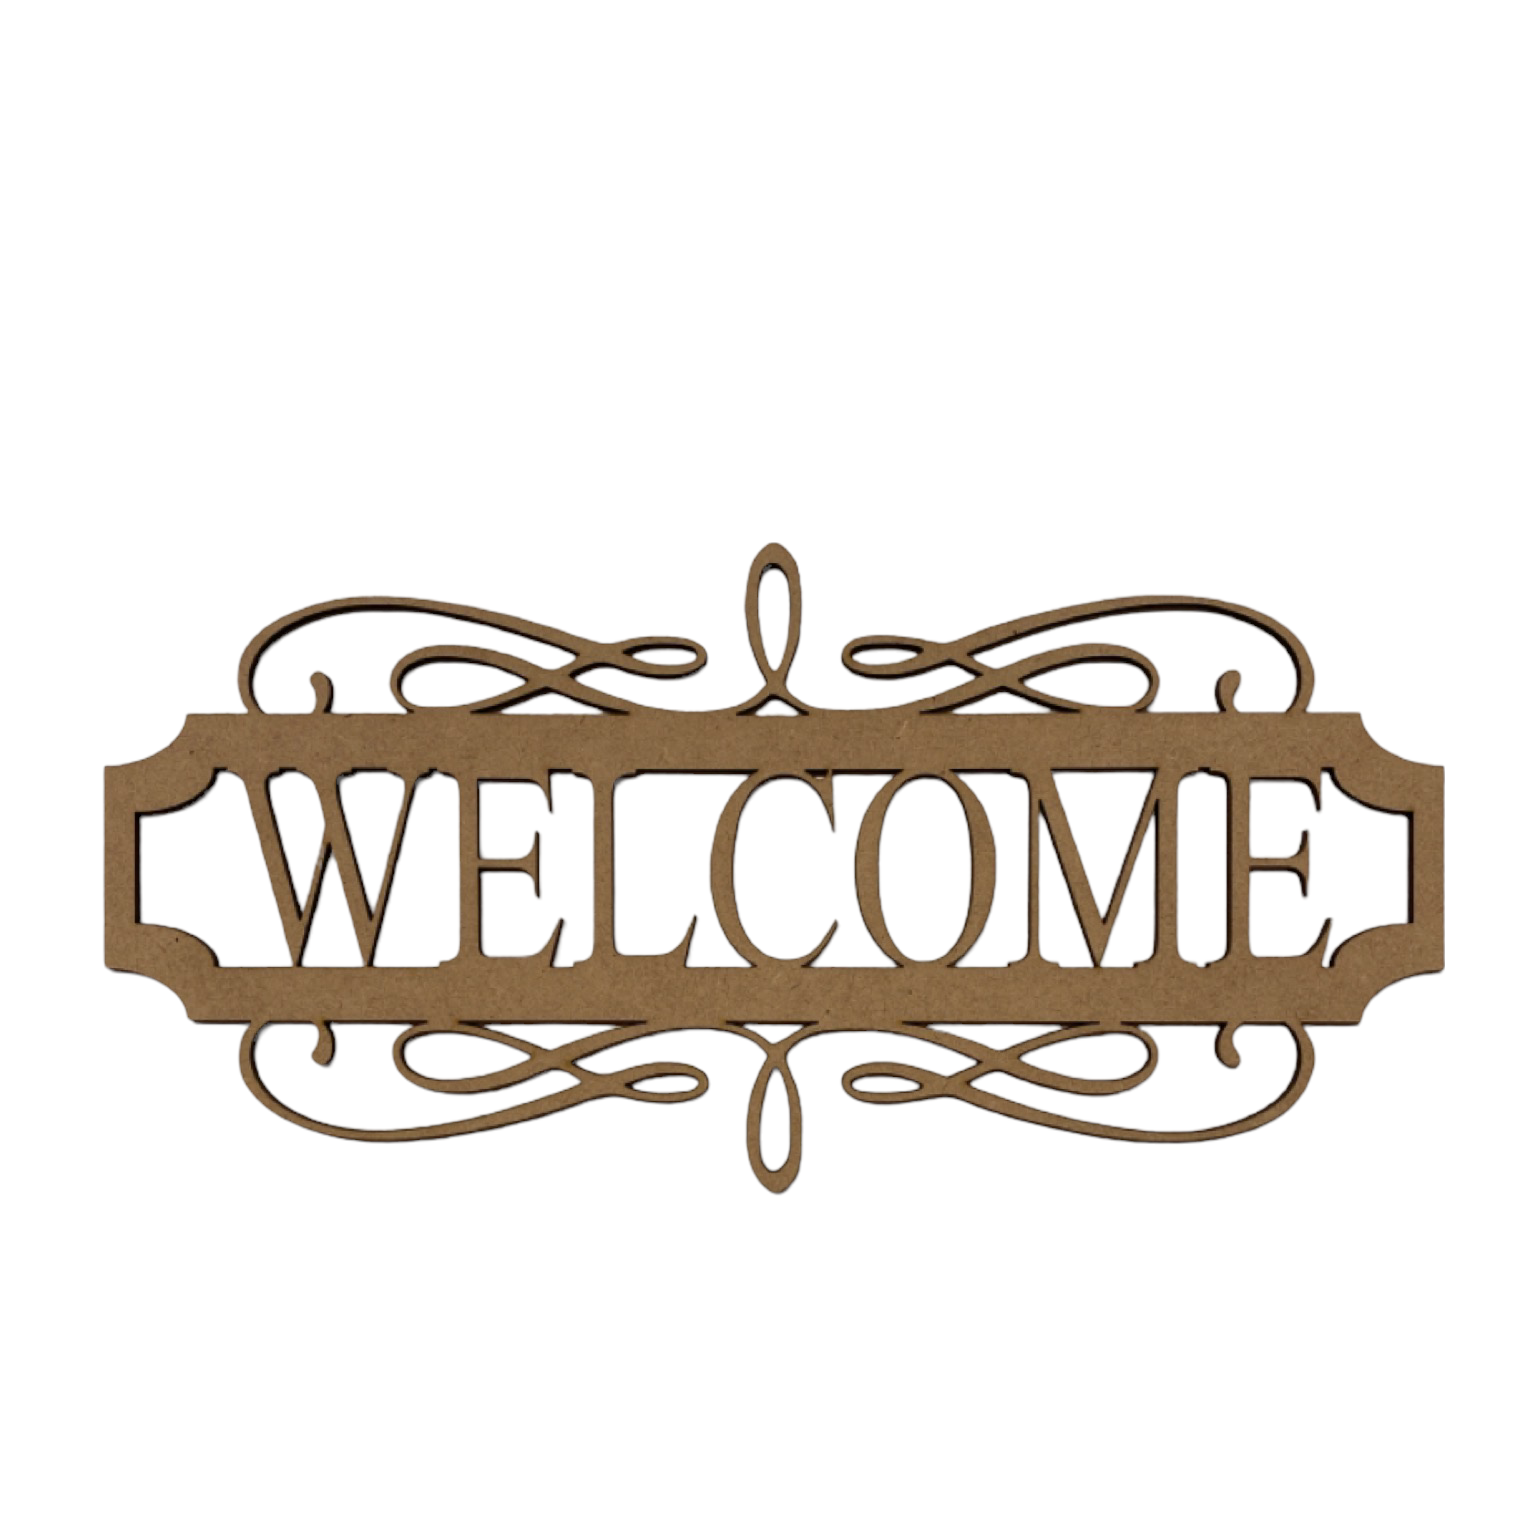 Welcome Scroll Wall Décor Wooden MDF DIY Large - The Renmy Store Homewares & Gifts 